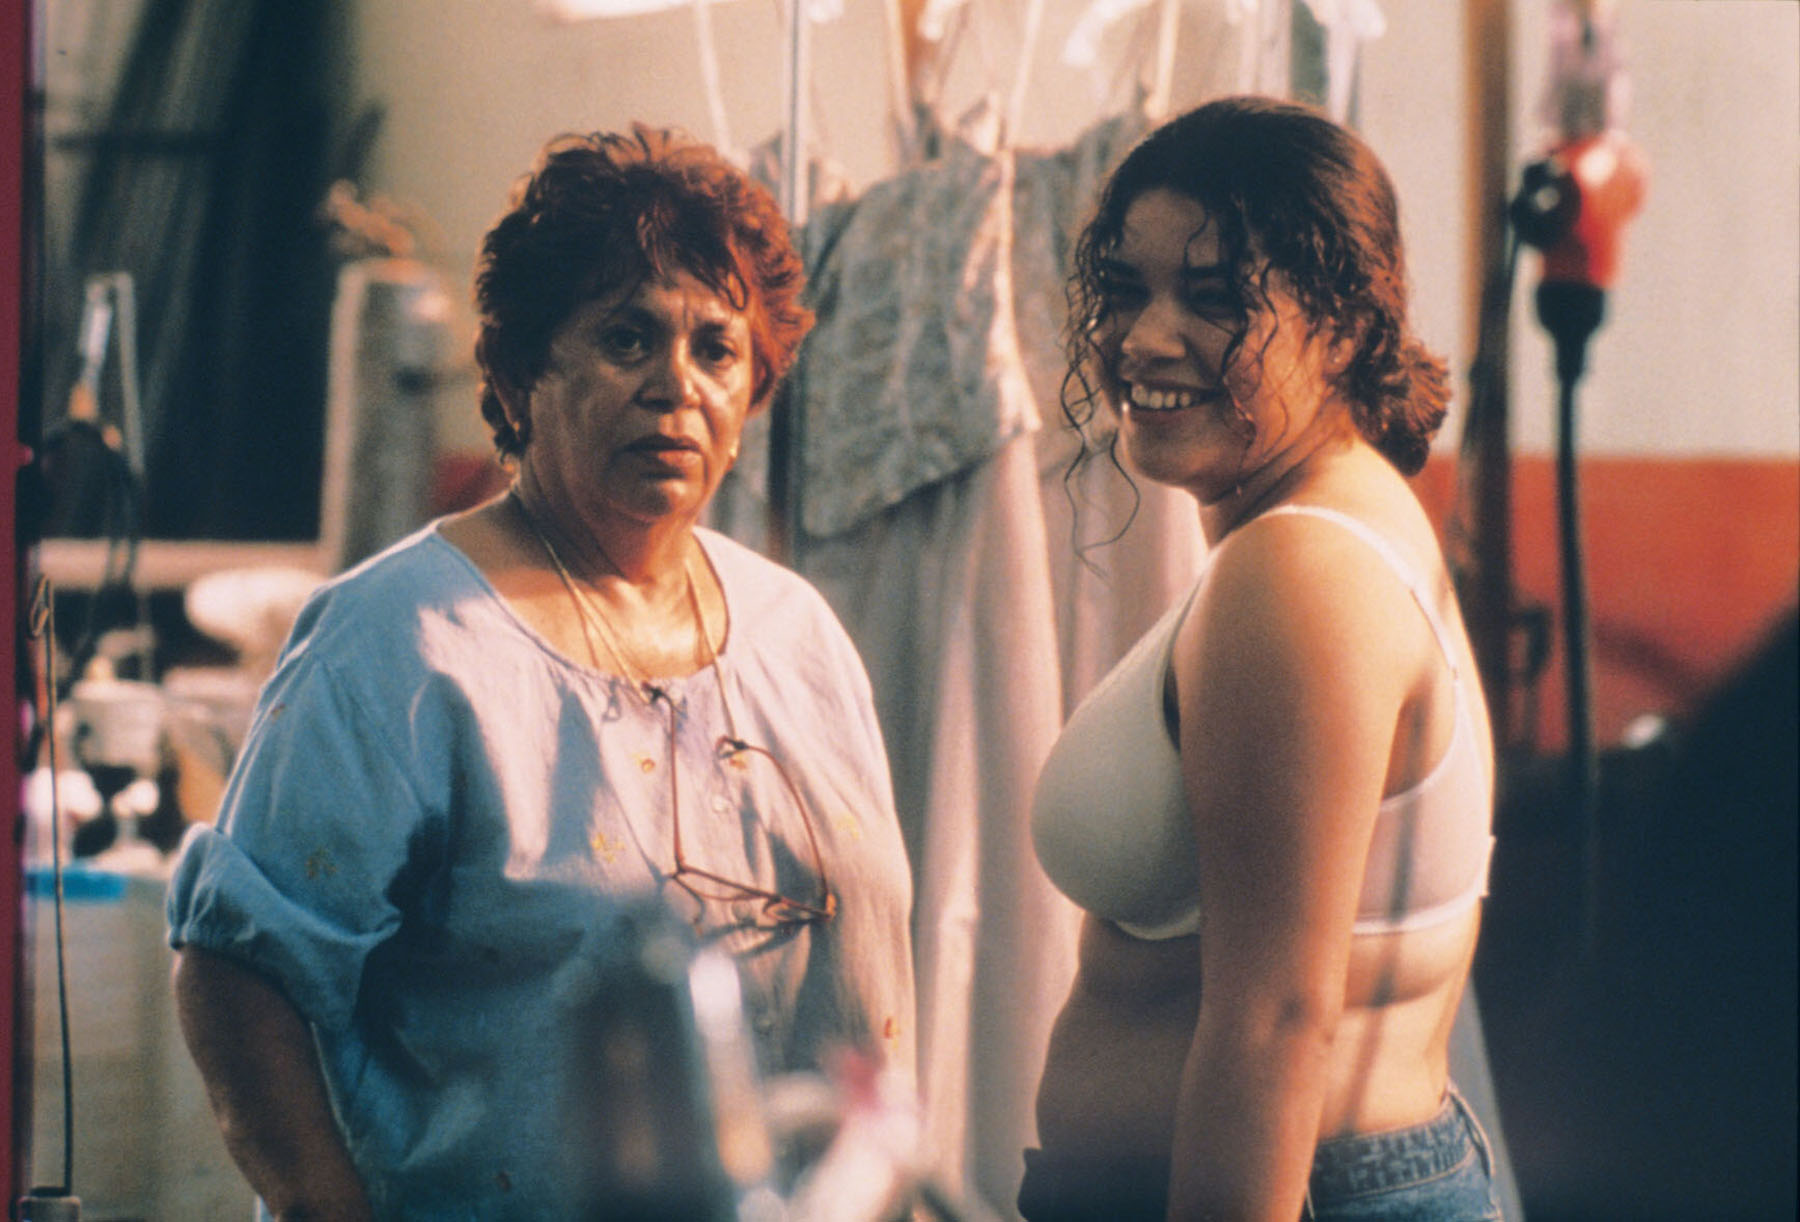 Lupe Ontiveros (as Carmen Garcia) and America Ferrera (as Ana Garcia) in Real Women Have Curves.